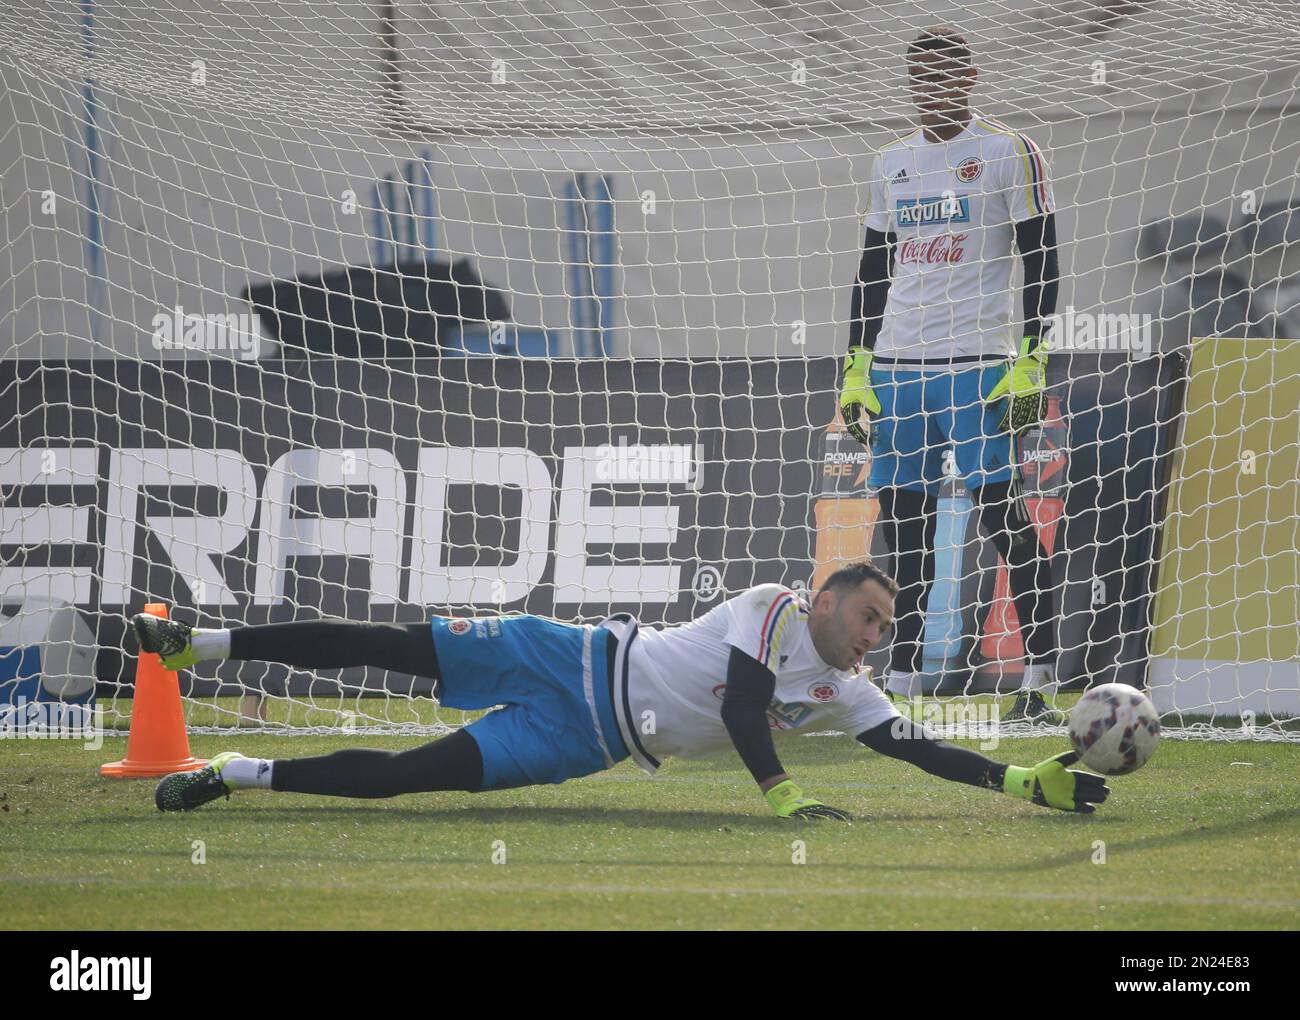 David Ospina, goalkeeper of Colombia's national soccer team, fails to stop the ball during a training session in Santiago, Chile, Tuesday June 23, 2015. Colombia will play against Argentina on June 26 in a Copa America quarter finals match. (AP Photo/Jorge Saenz) Stock Photo